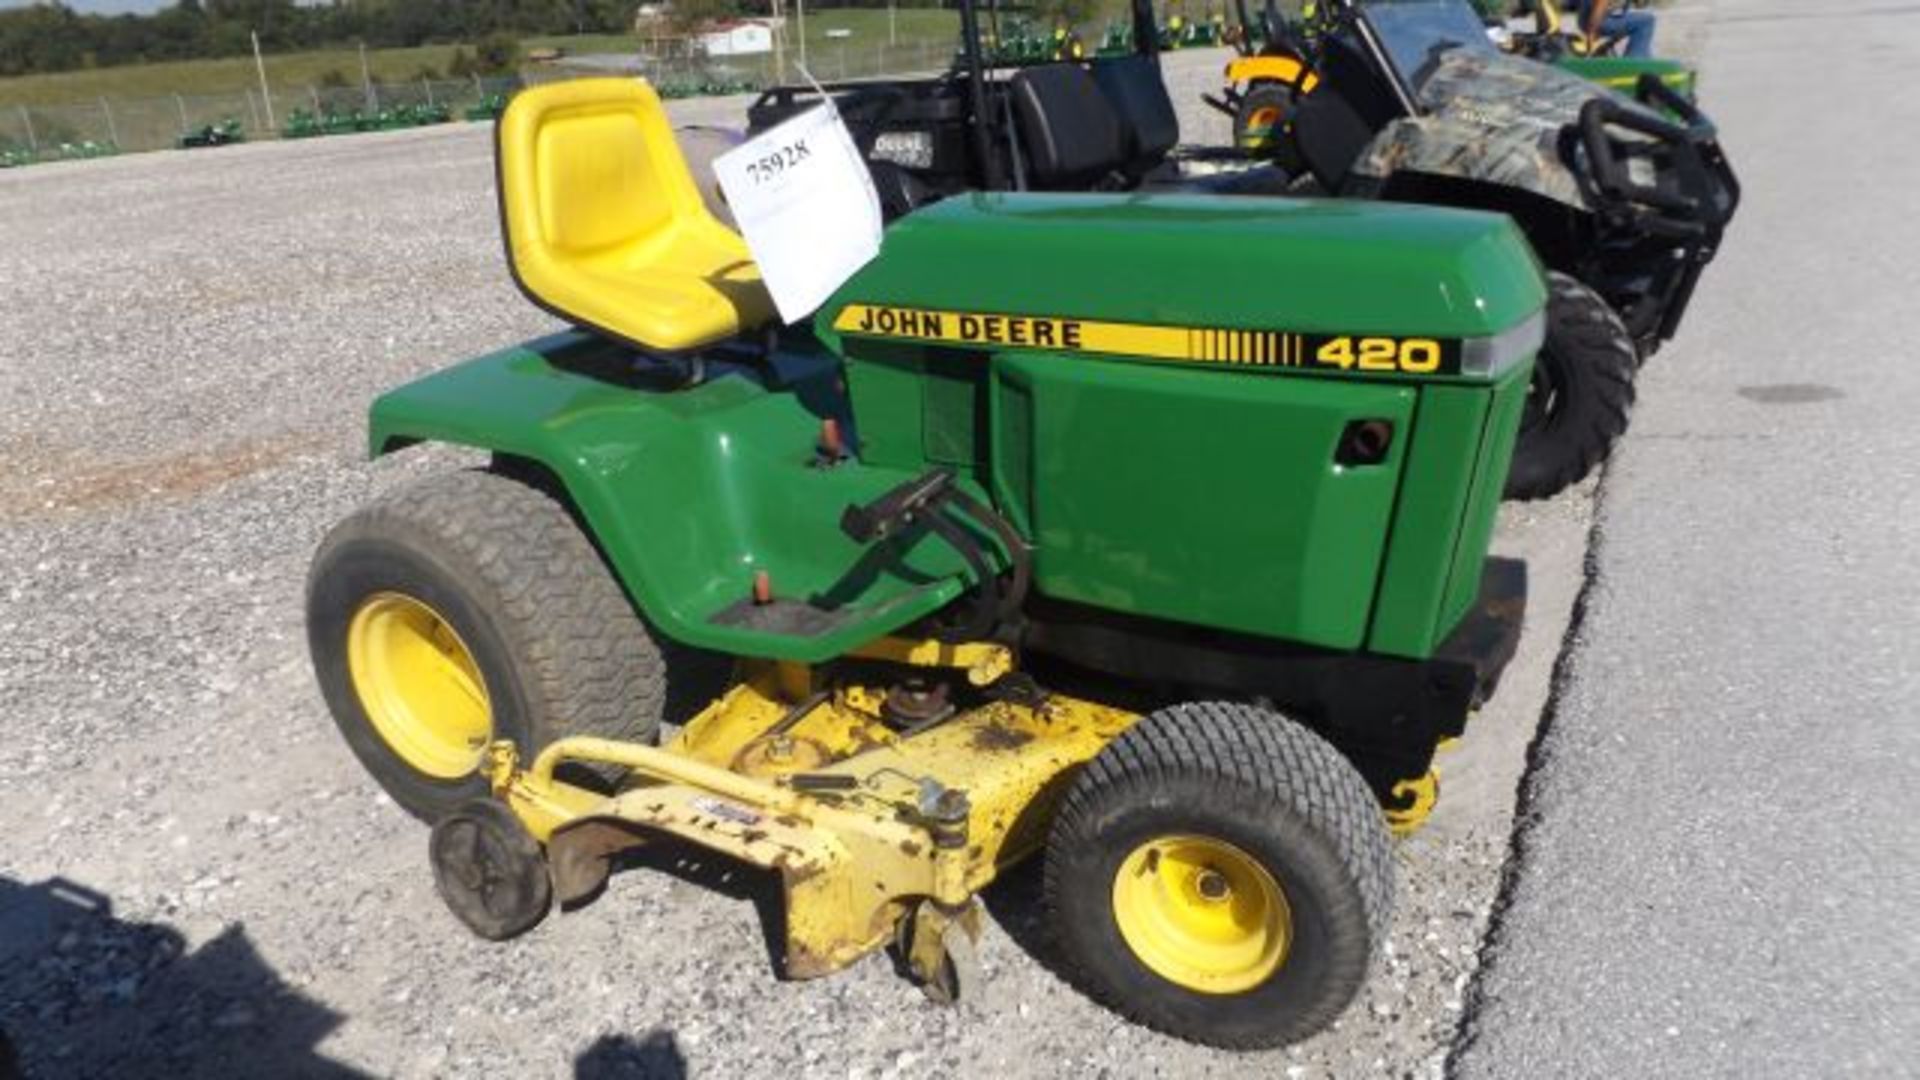 1988 JD 420 Mower #112193, 1462 hrs, 60" Deck, 22hp Honda Repower Engine, PS, Hyd Lift, Diff Lock, 2 - Image 2 of 3